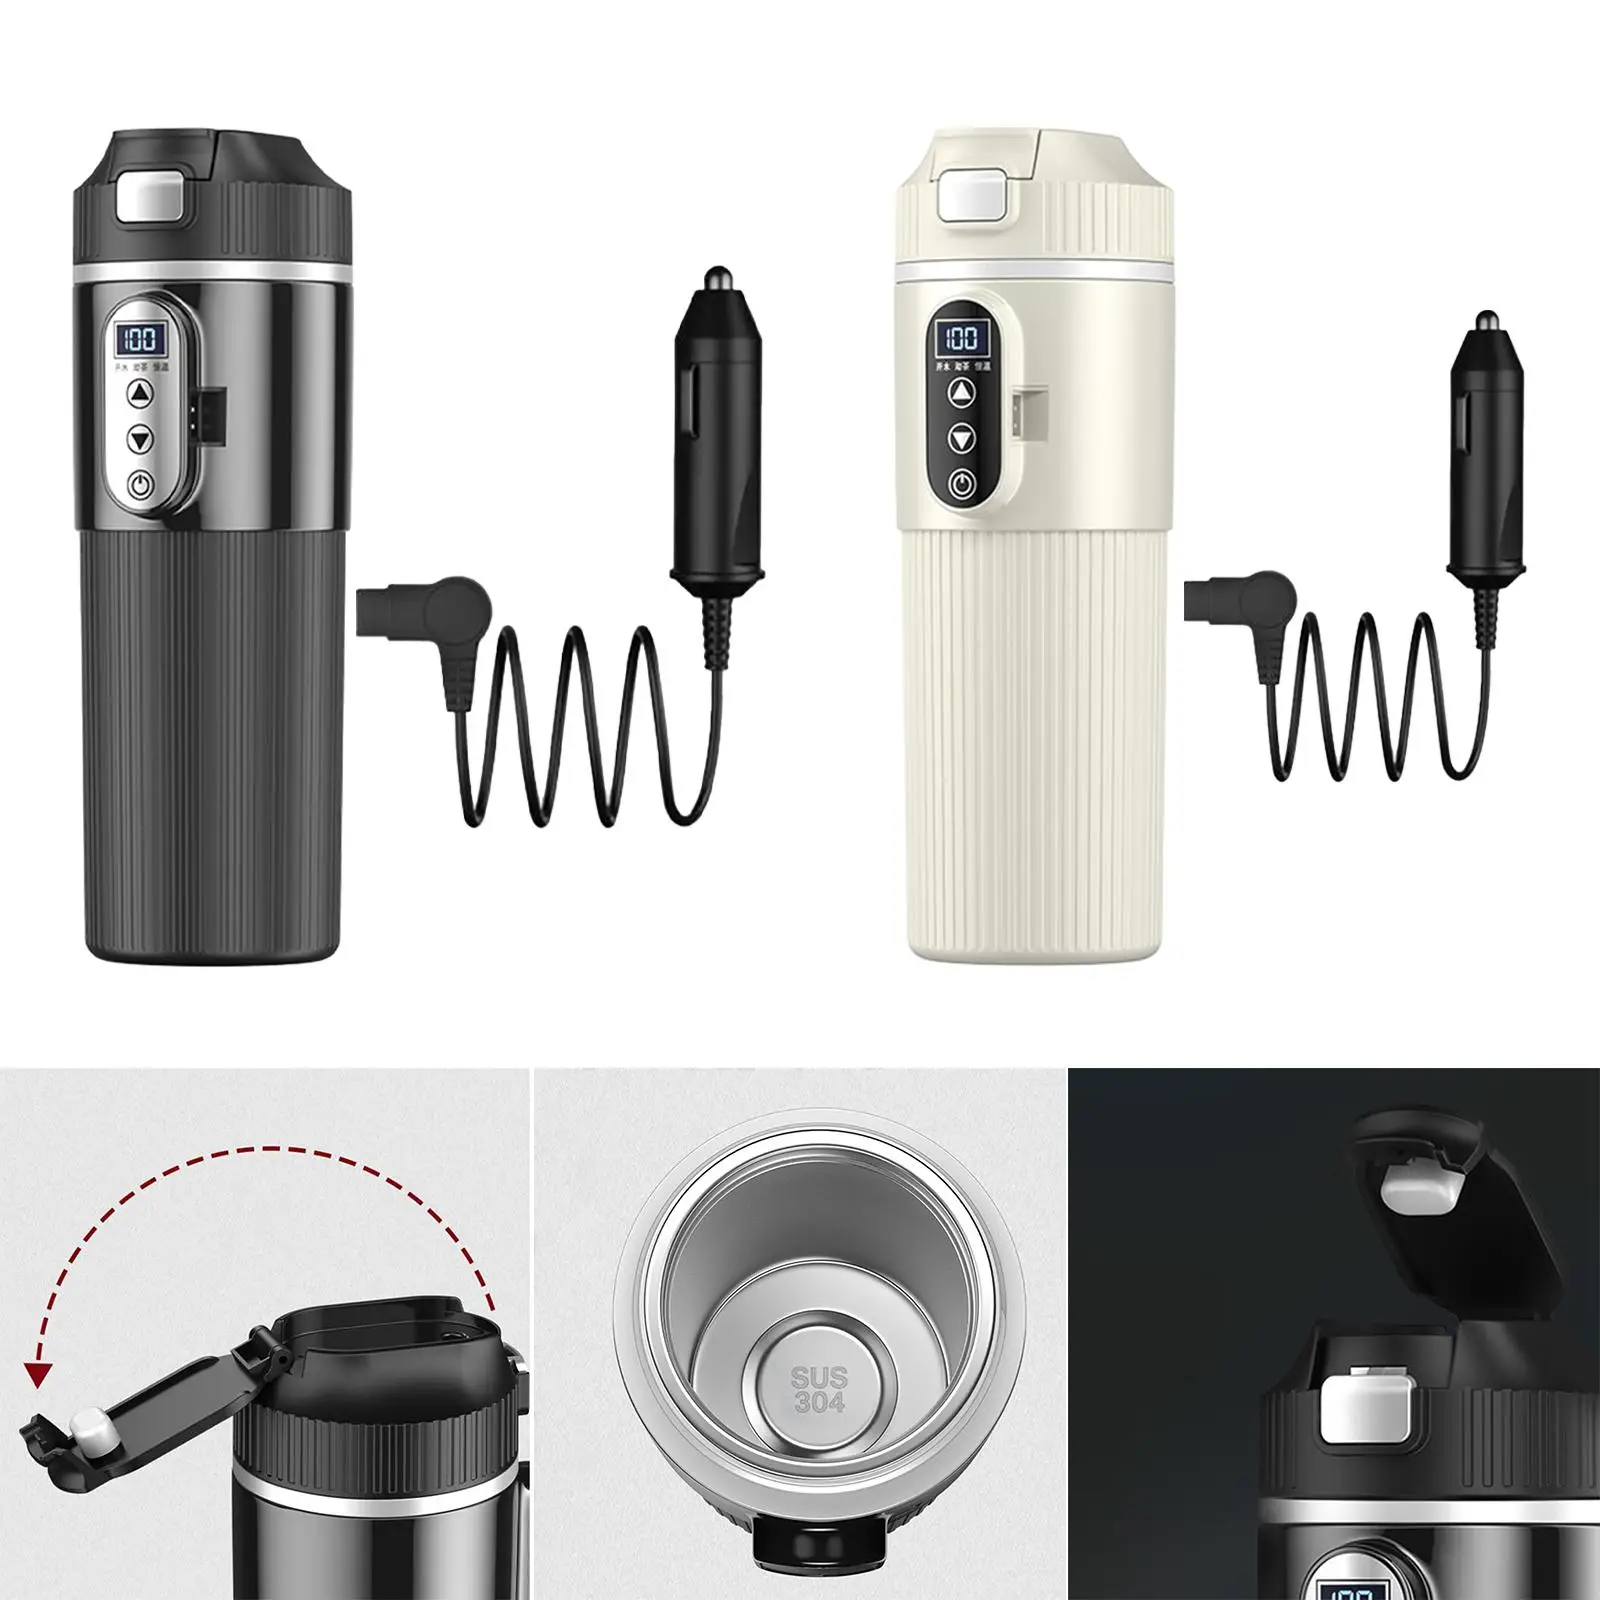 Car Heating Cup Easily Washing Smart Heating Car Cup Electric Heated Travel Mug for Tea Milk Heated Heating Water Outdoor